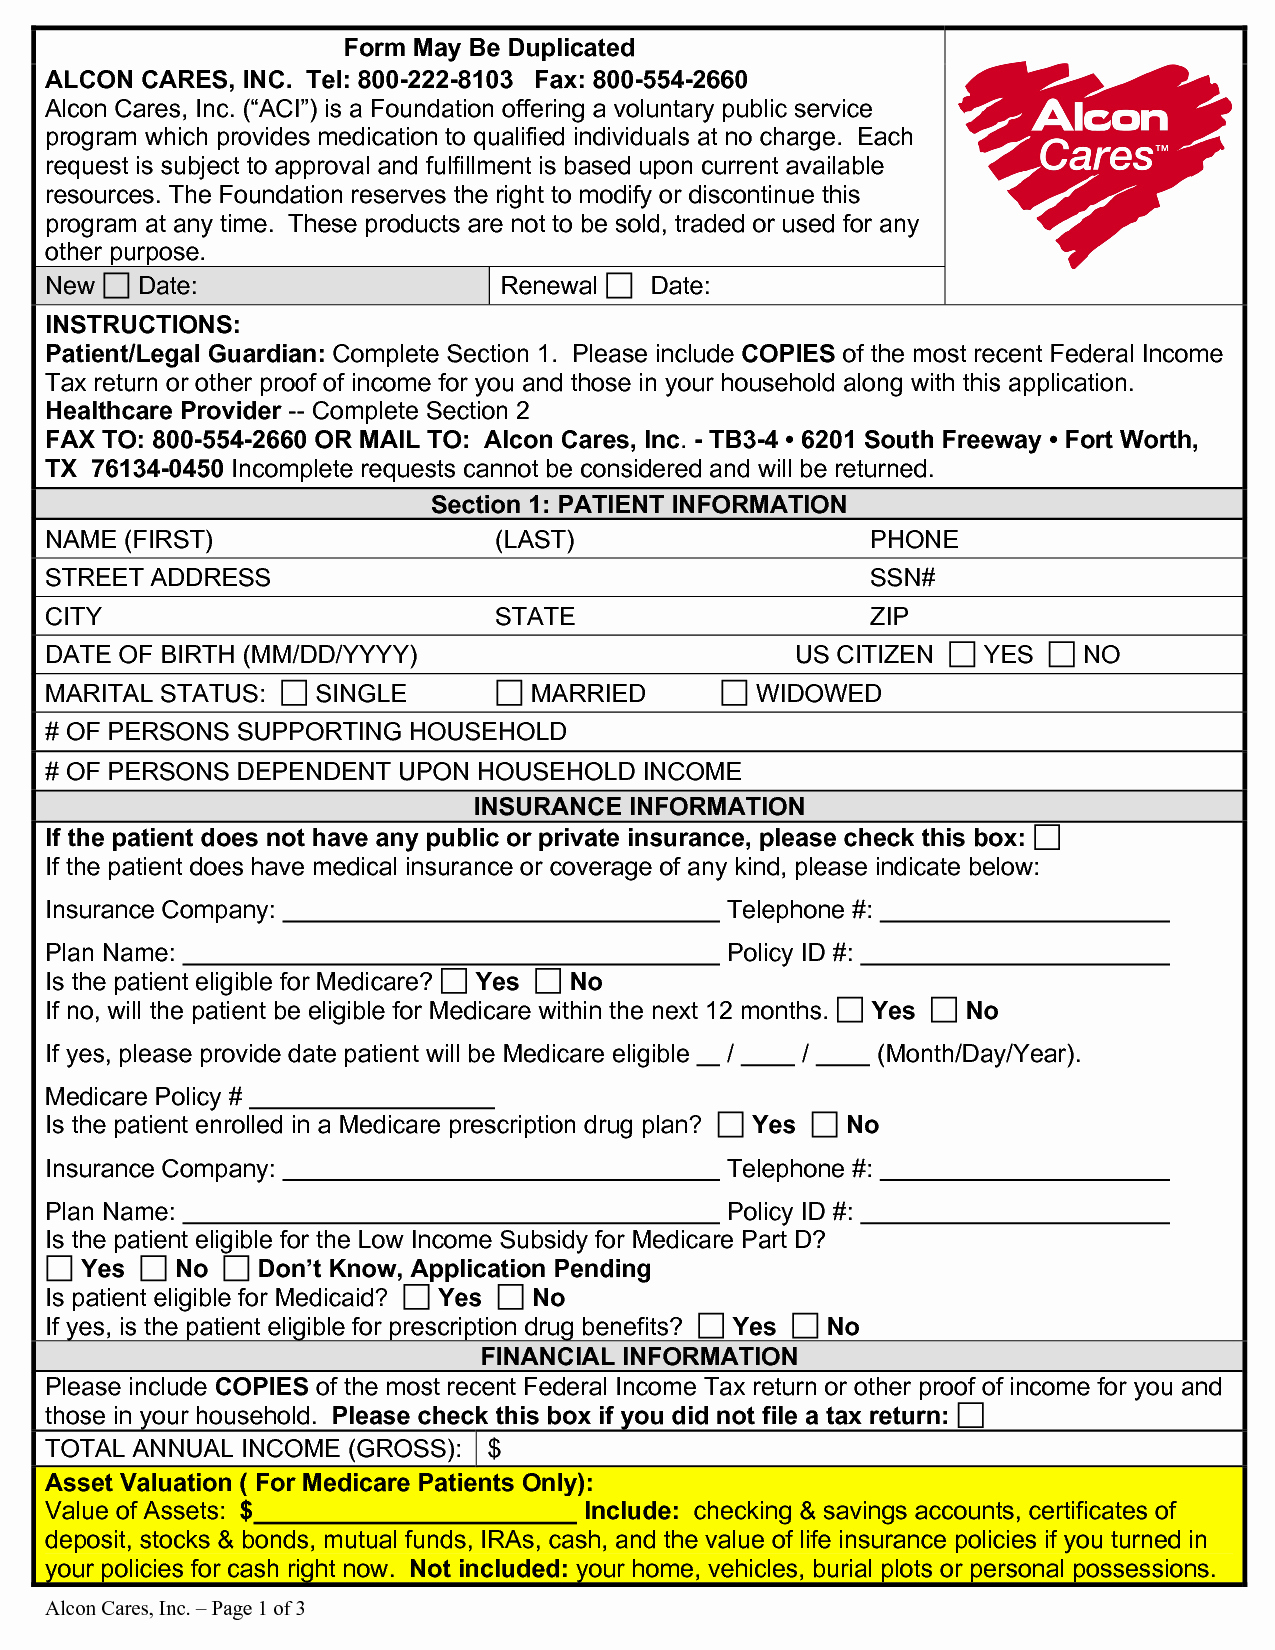 Free Durable Power Of Attorney Forms To Print Florida | Papers And Forms - Free Printable Power Of Attorney Form Florida